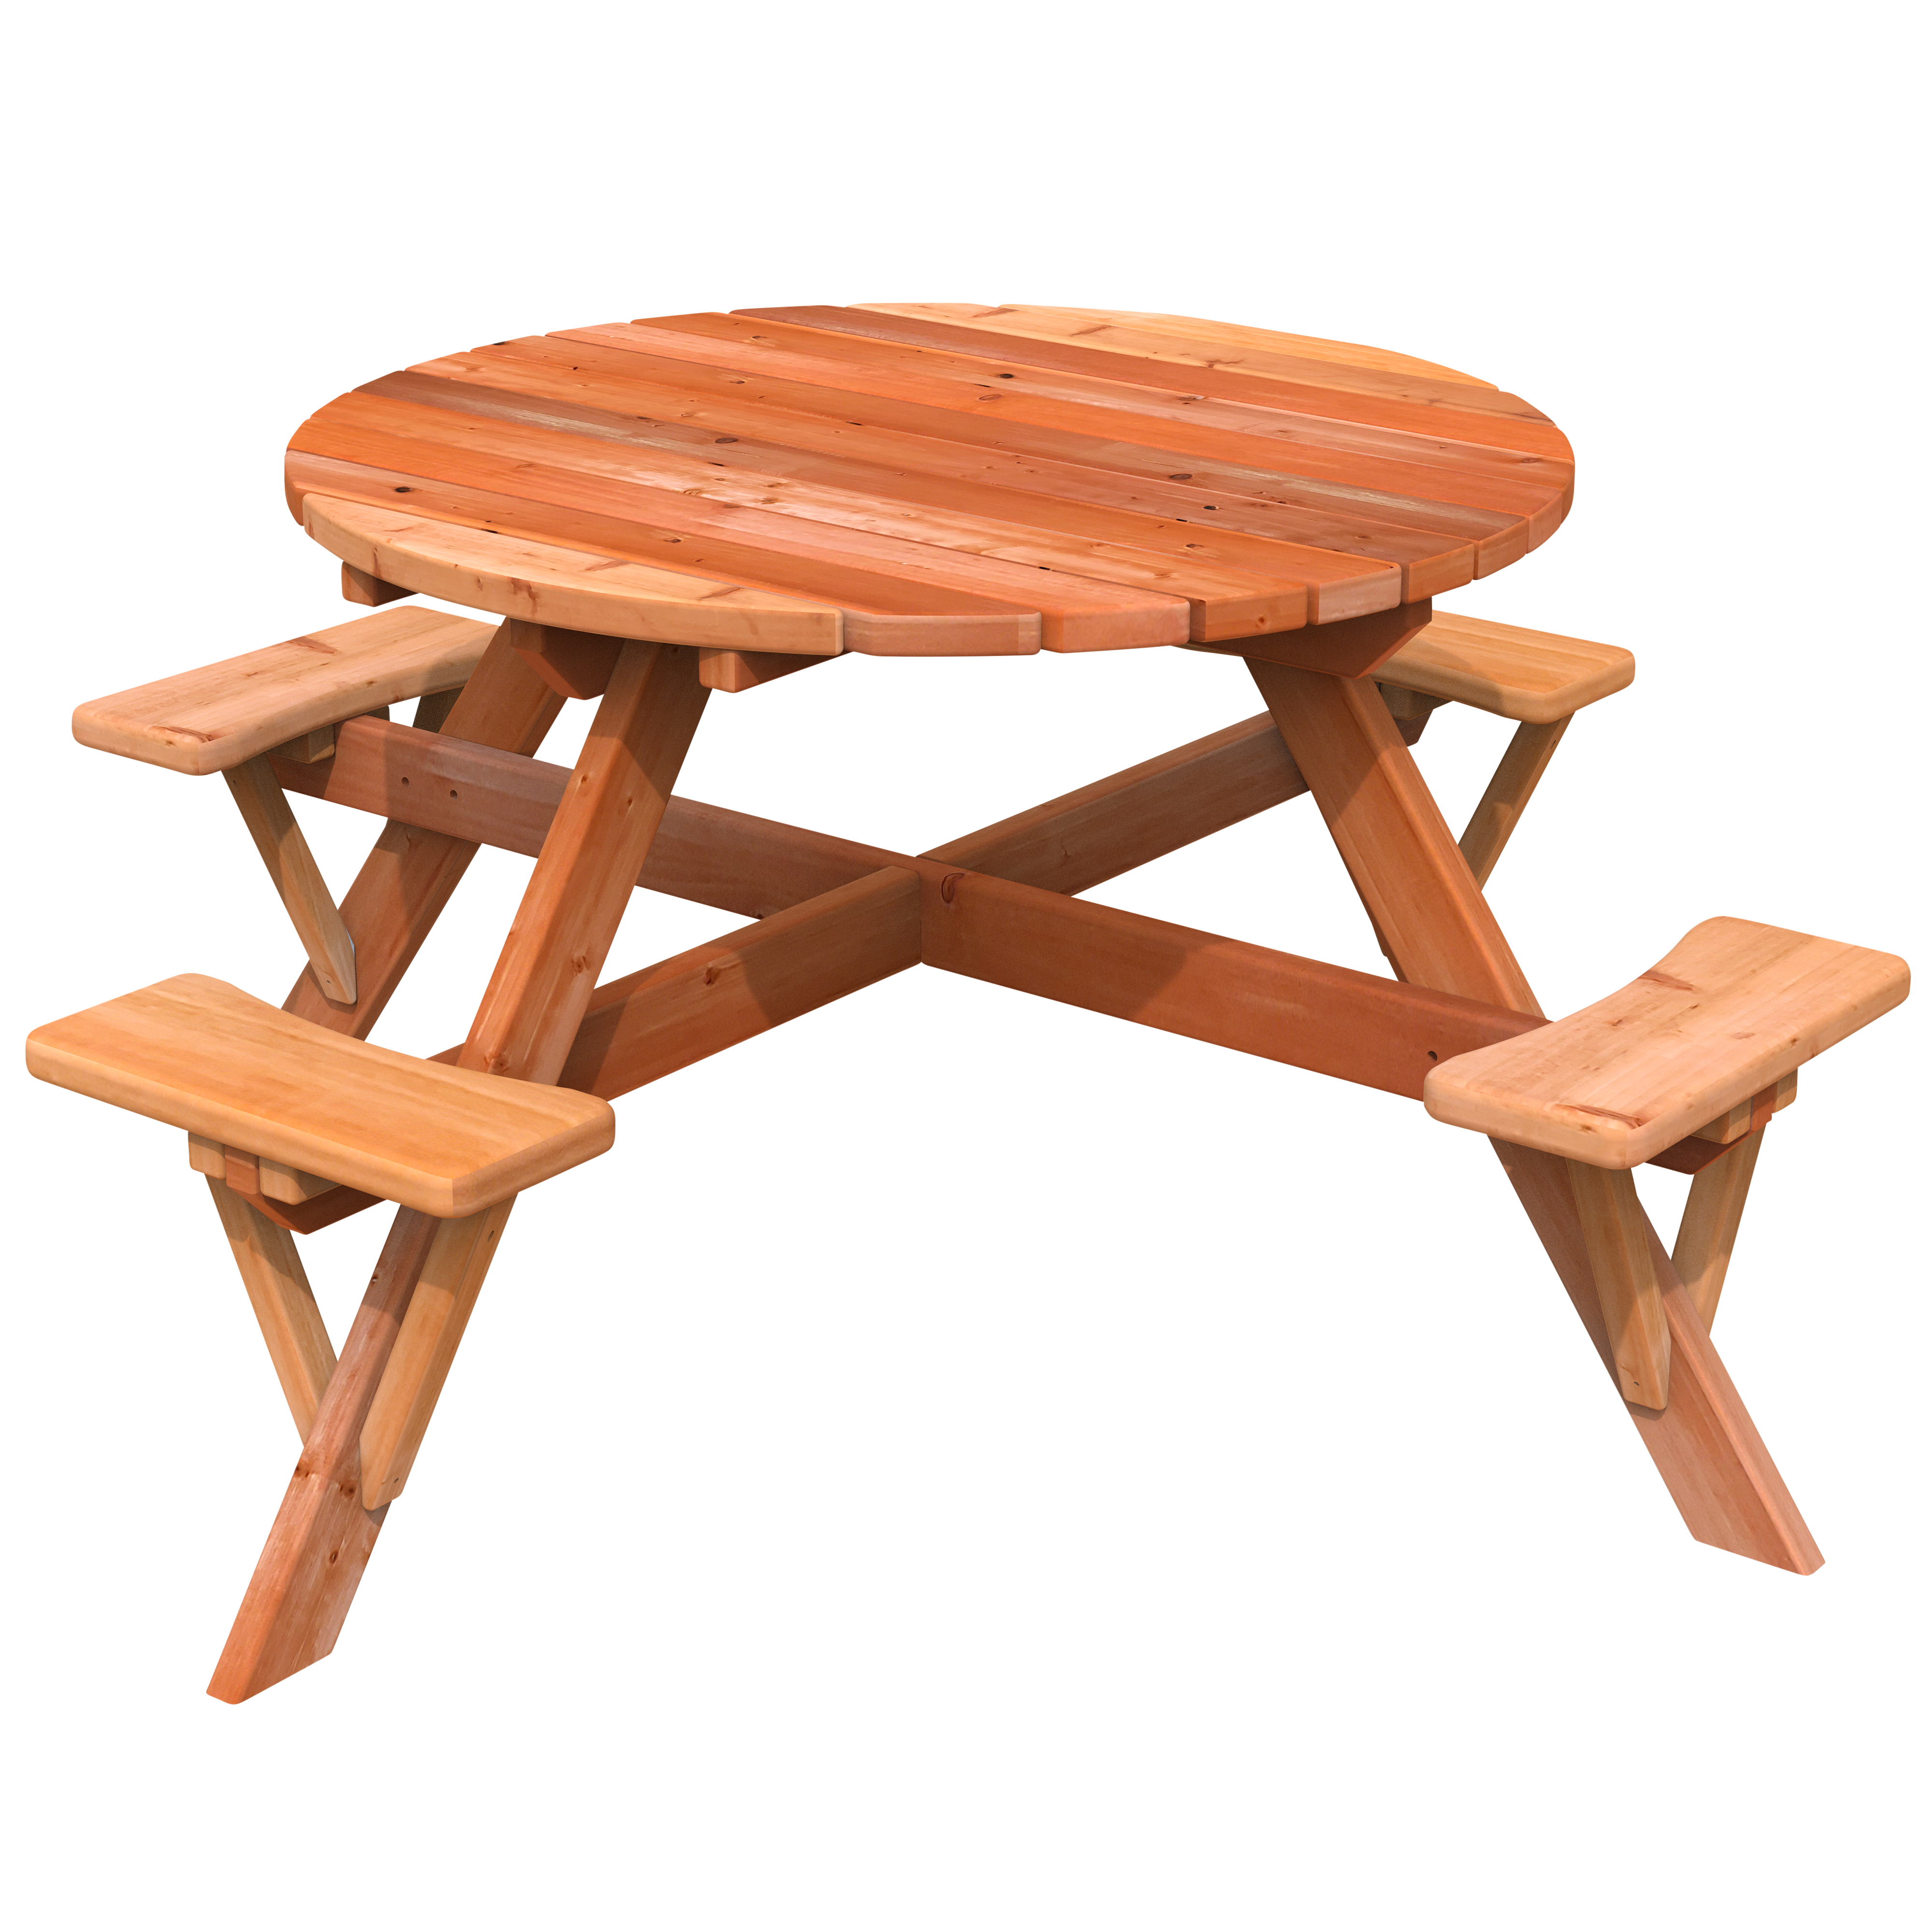 Redwood Picnic Table, Customize your Redwood Table